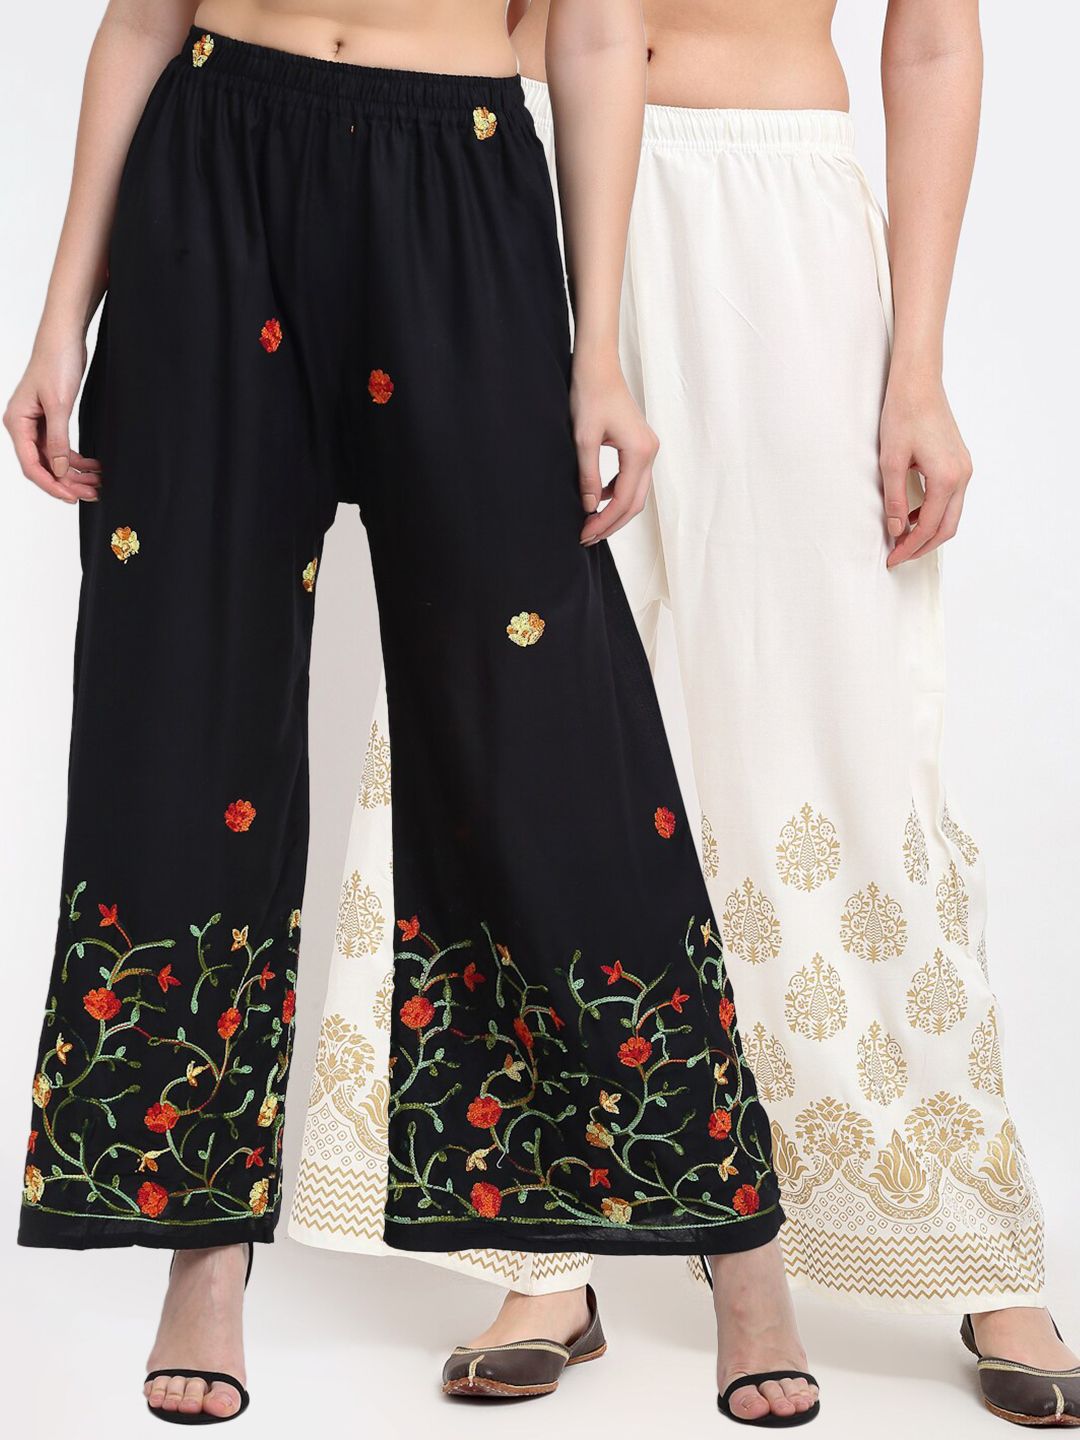 TAG 7 Women Black & White Pack of 2 Floral Embroidered Flared Ethnic Palazzos Price in India